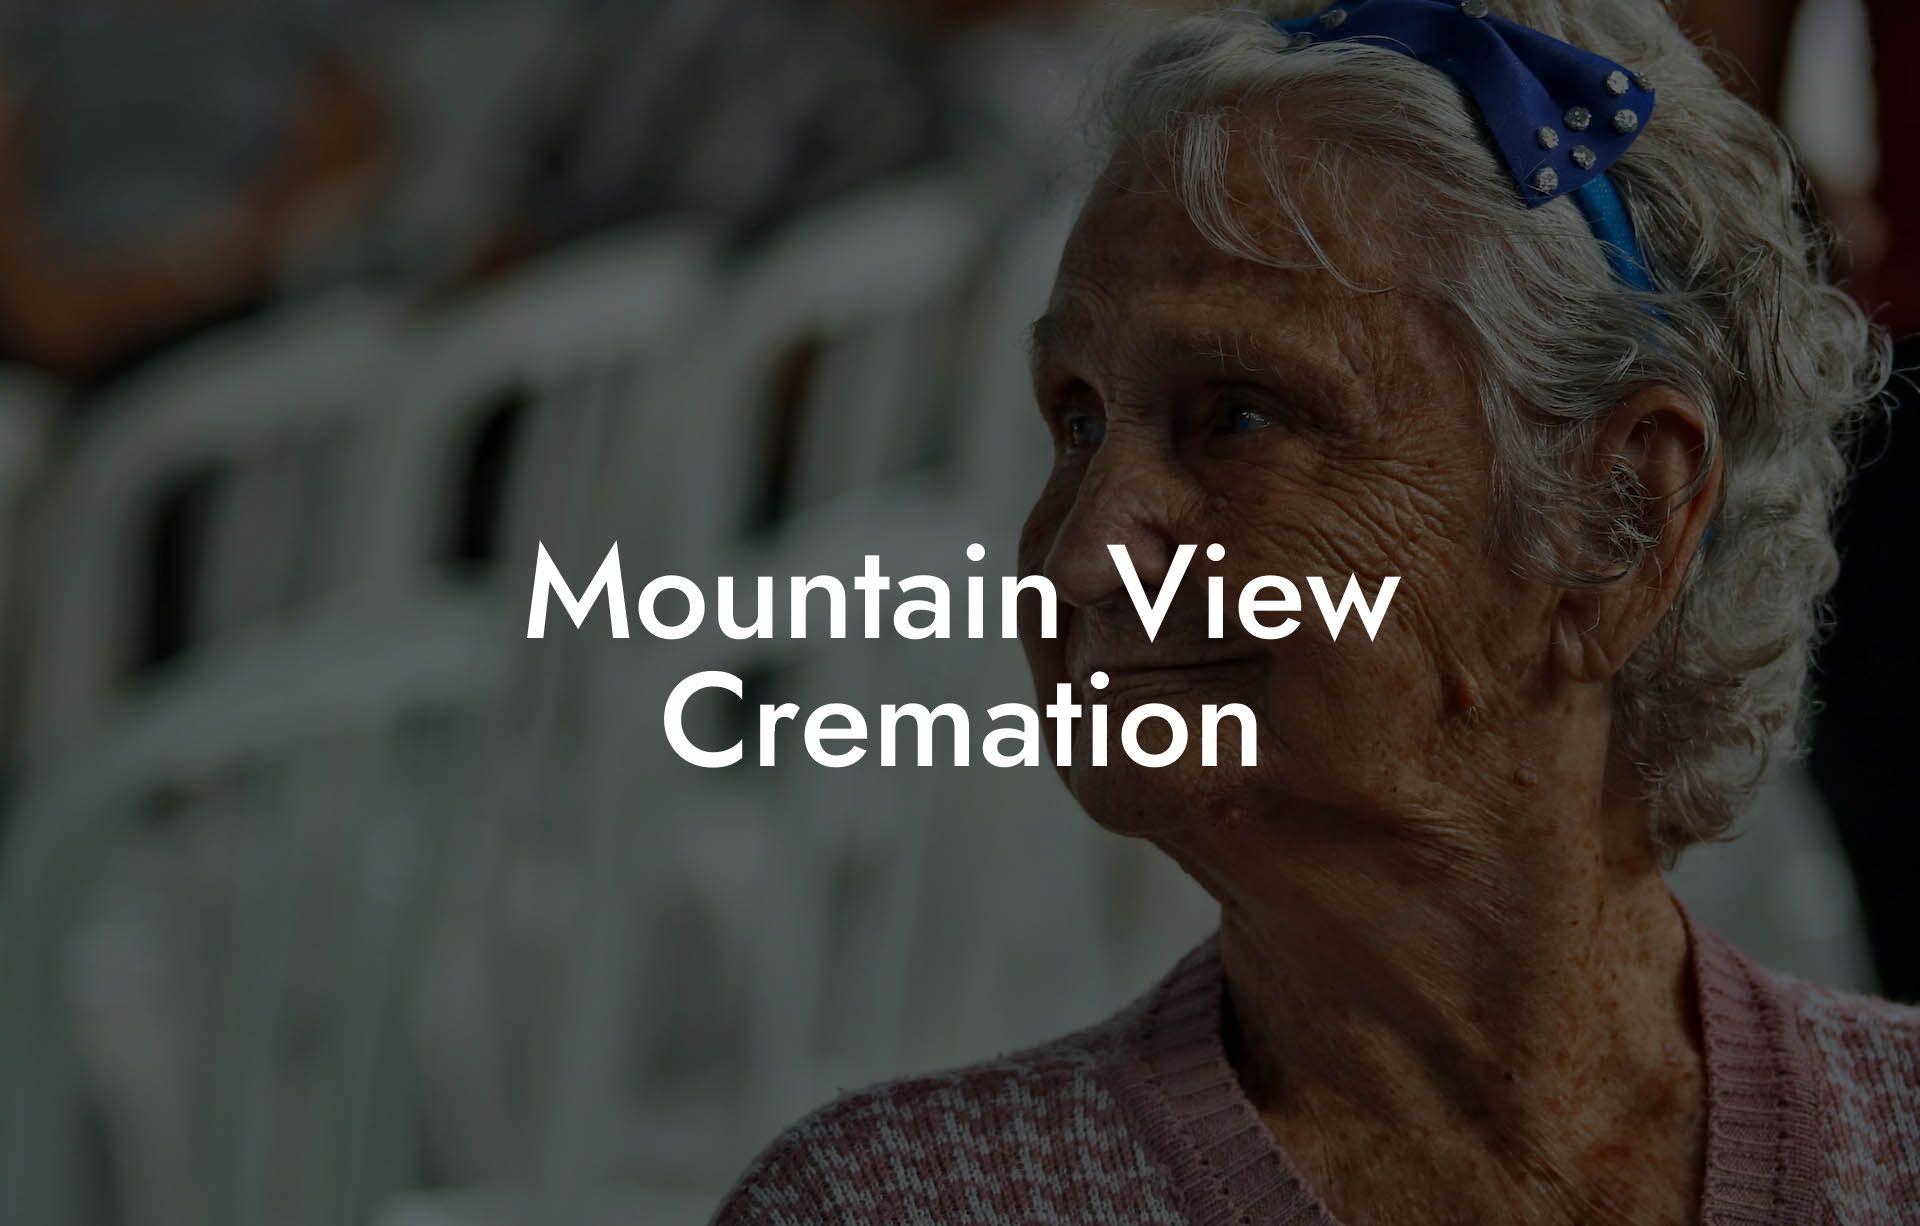 Mountain View Cremation